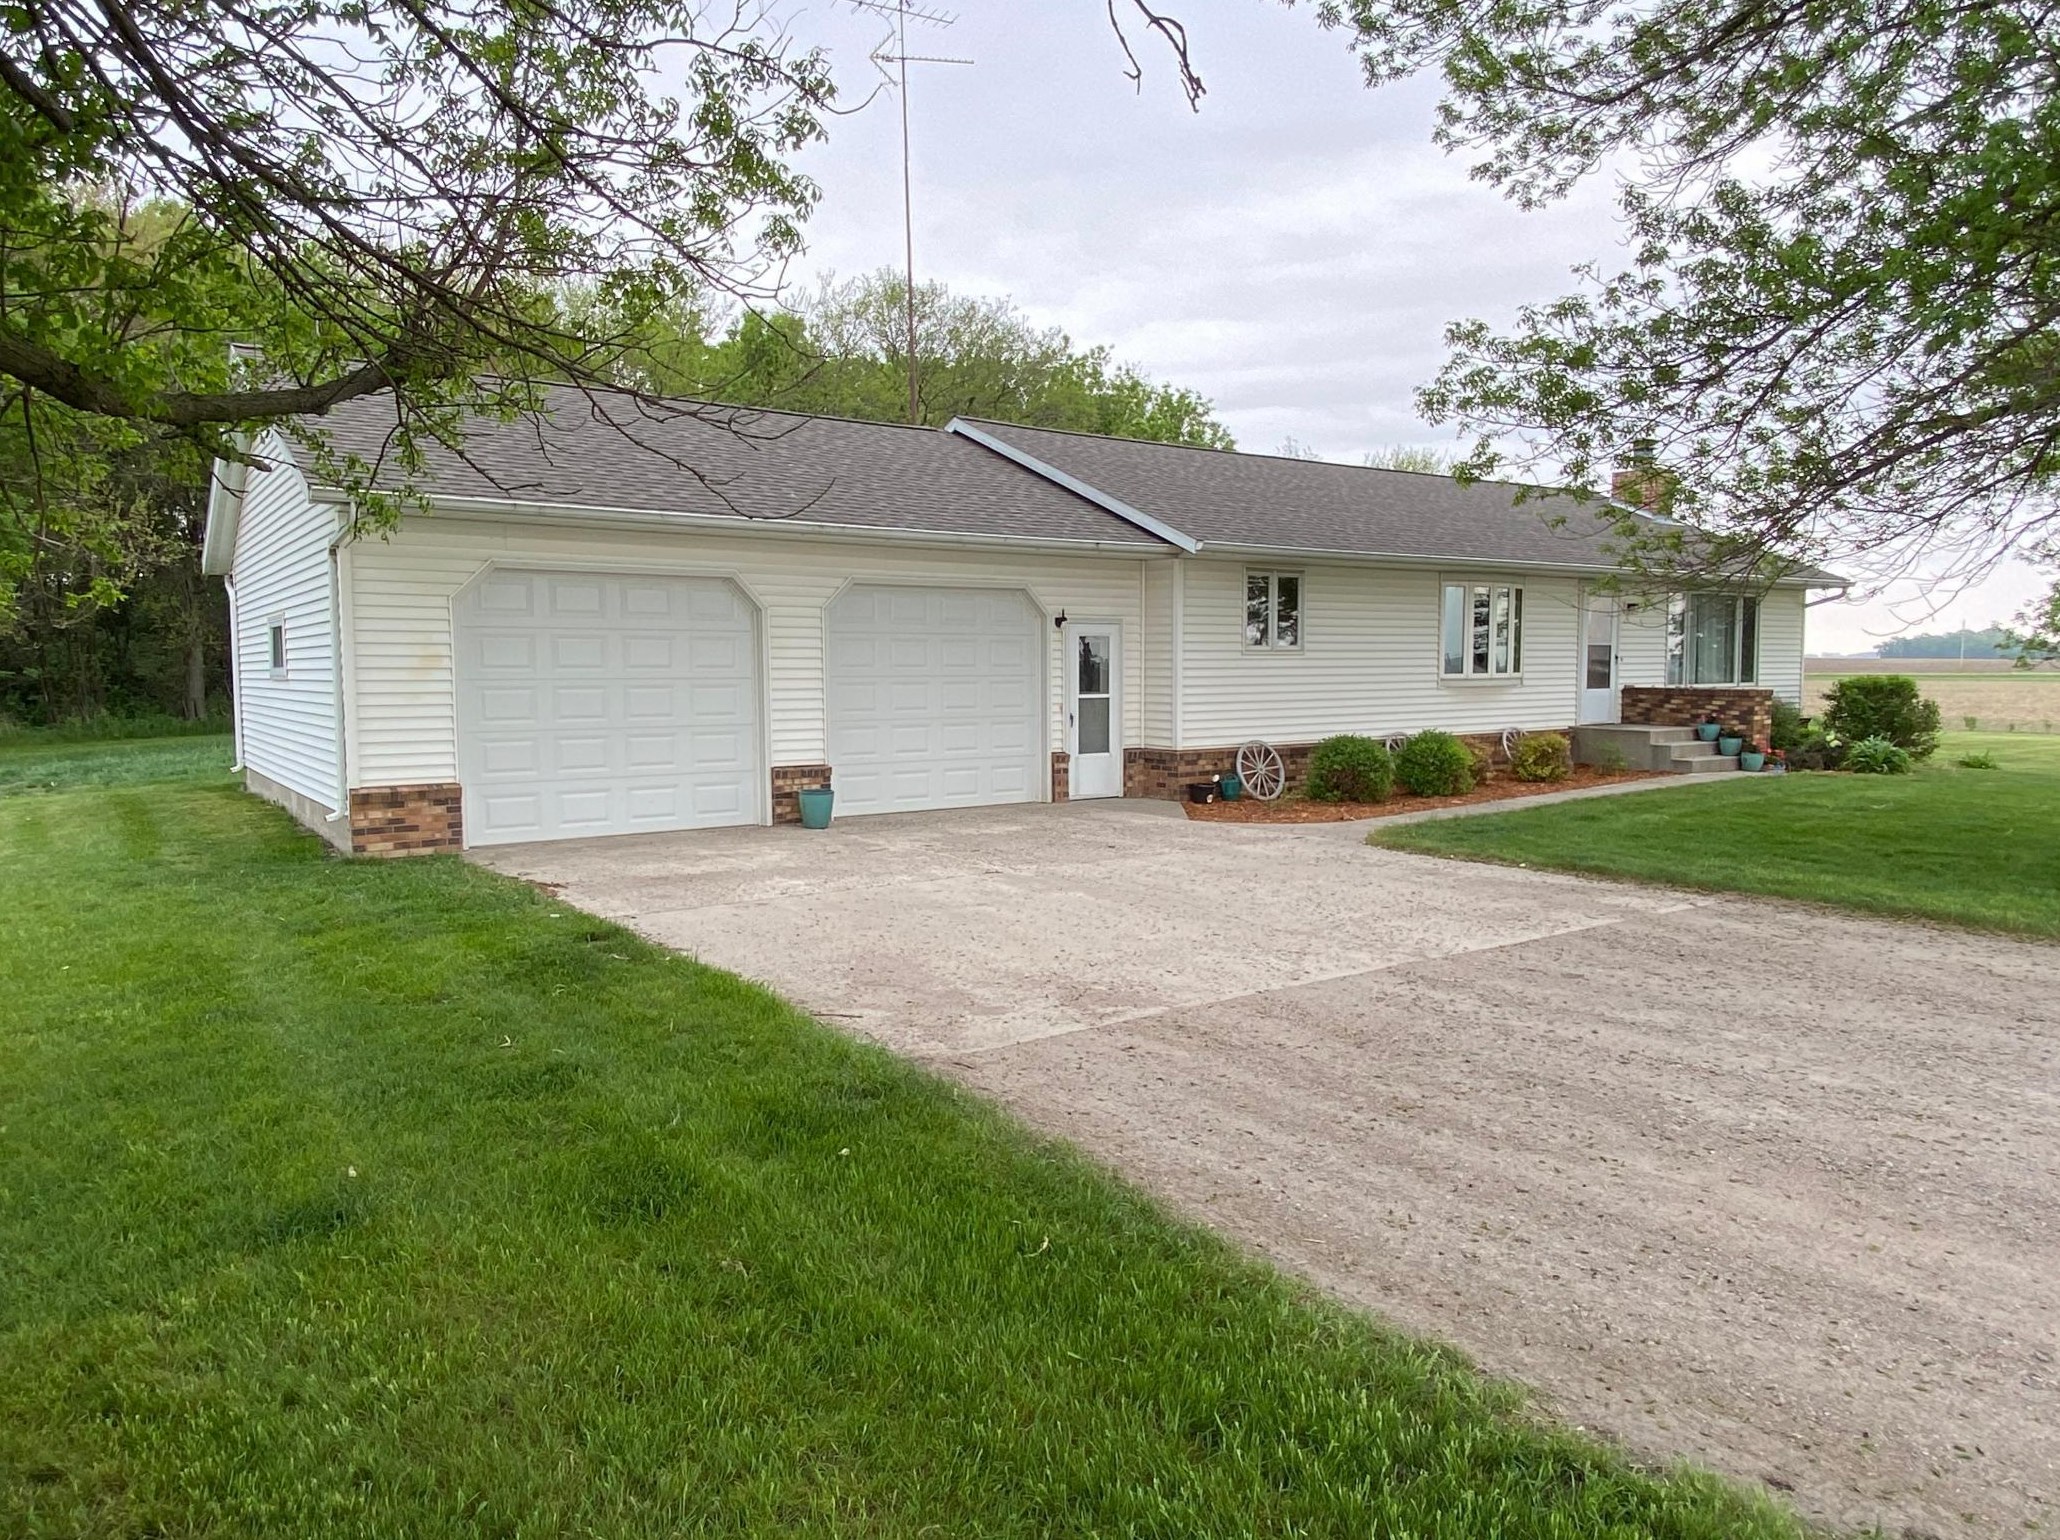 86371 270th St, Renville, MN 56284